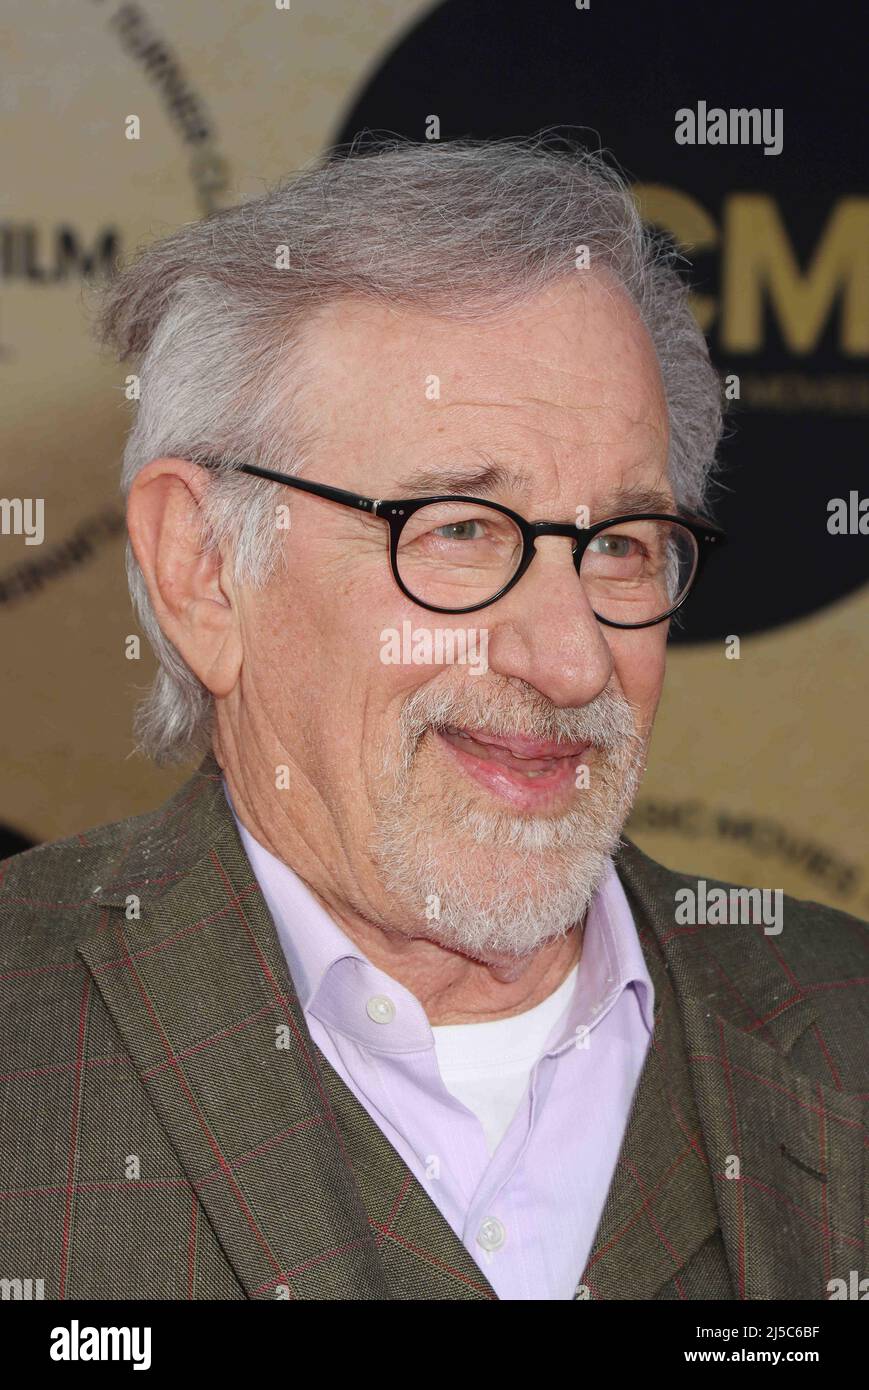 Steven Spielberg, Los Angeles, USA. 21st Apr, 2022. Steven Spielberg 2022/04/21 The 40th Anniversary Screening of “E.T. the Extra-Terrestrial” held at TCL Chinese Theatre in Hollywood, CA, Credit: Cronos/Alamy Live News Stock Photo